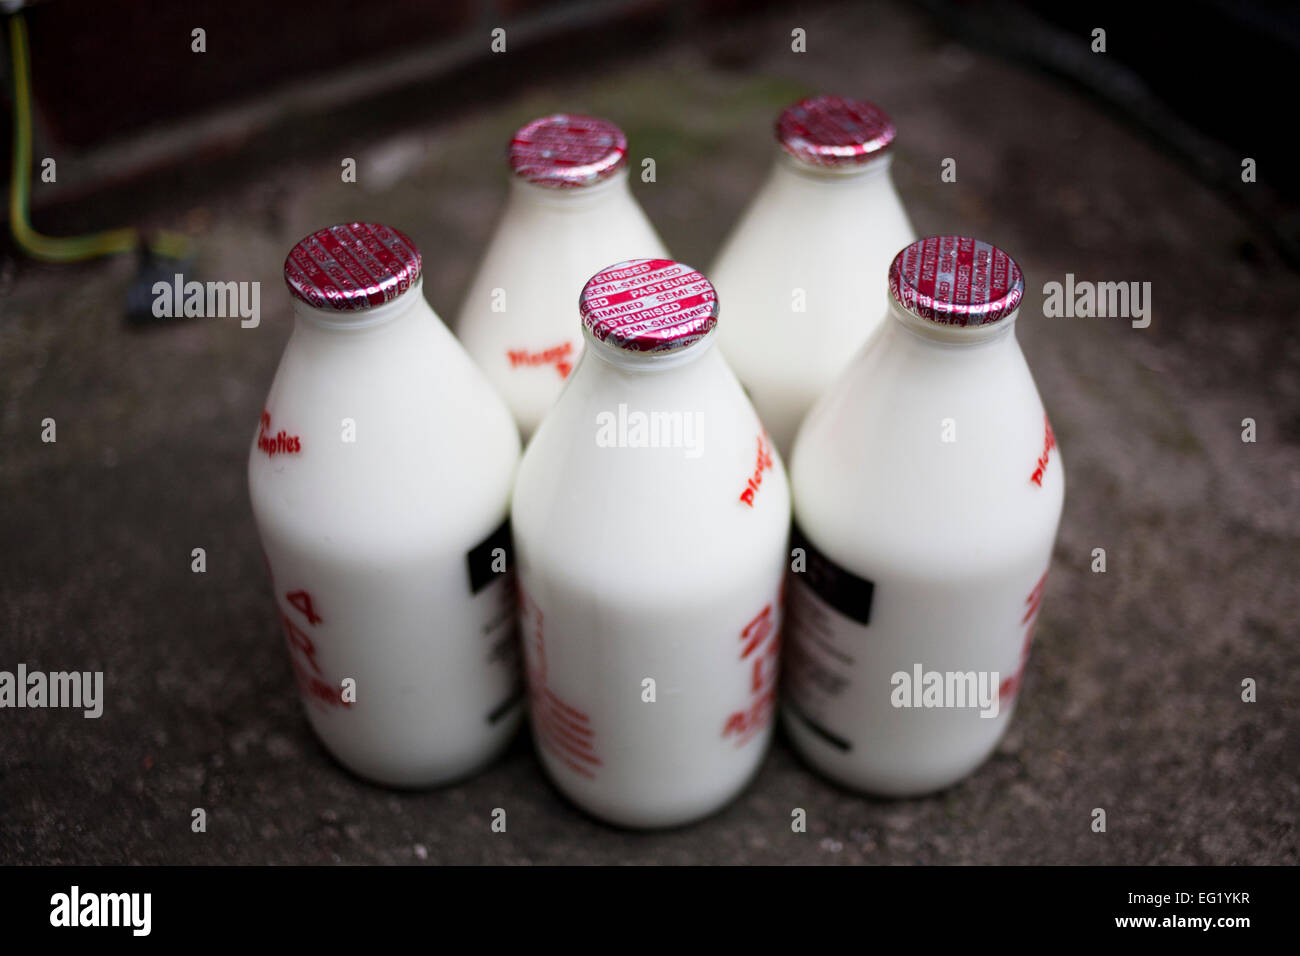 Milk bottles delivered to a household. Stock Photo